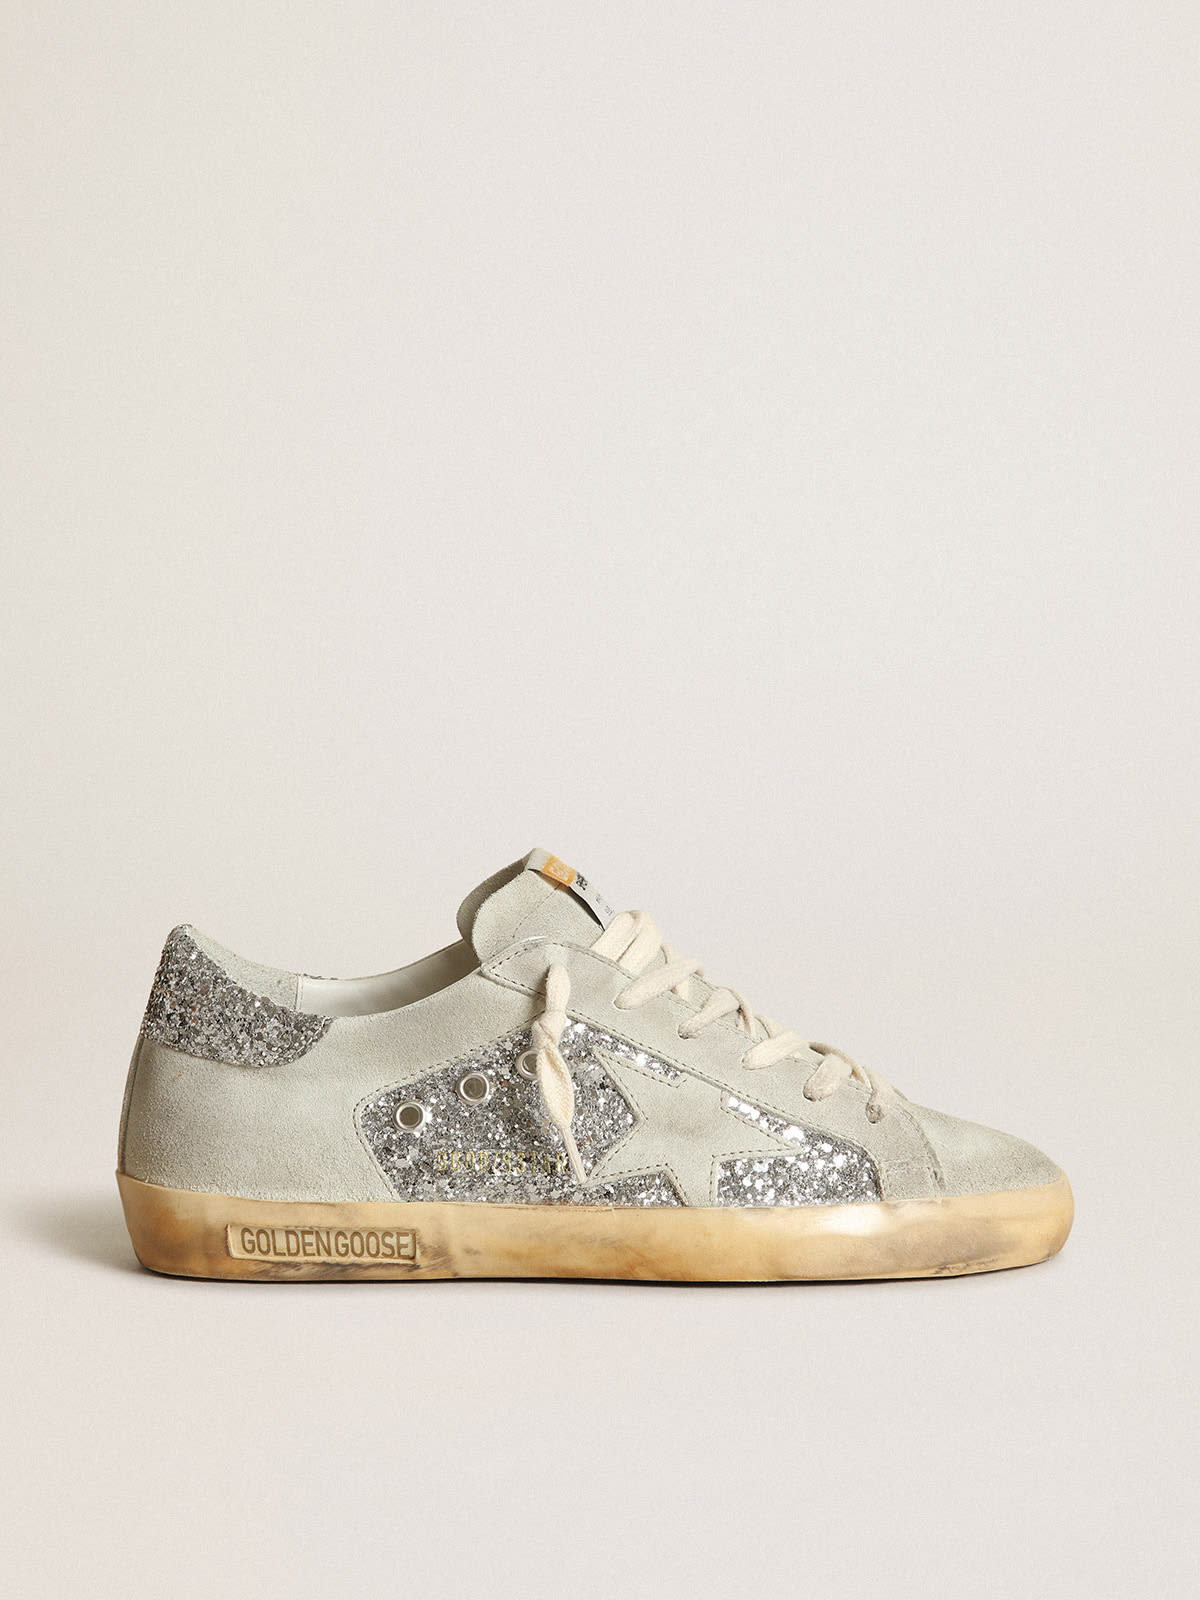 Golden Goose - Super-Star sneakers in silver glitter with ice-gray suede star and inserts in 